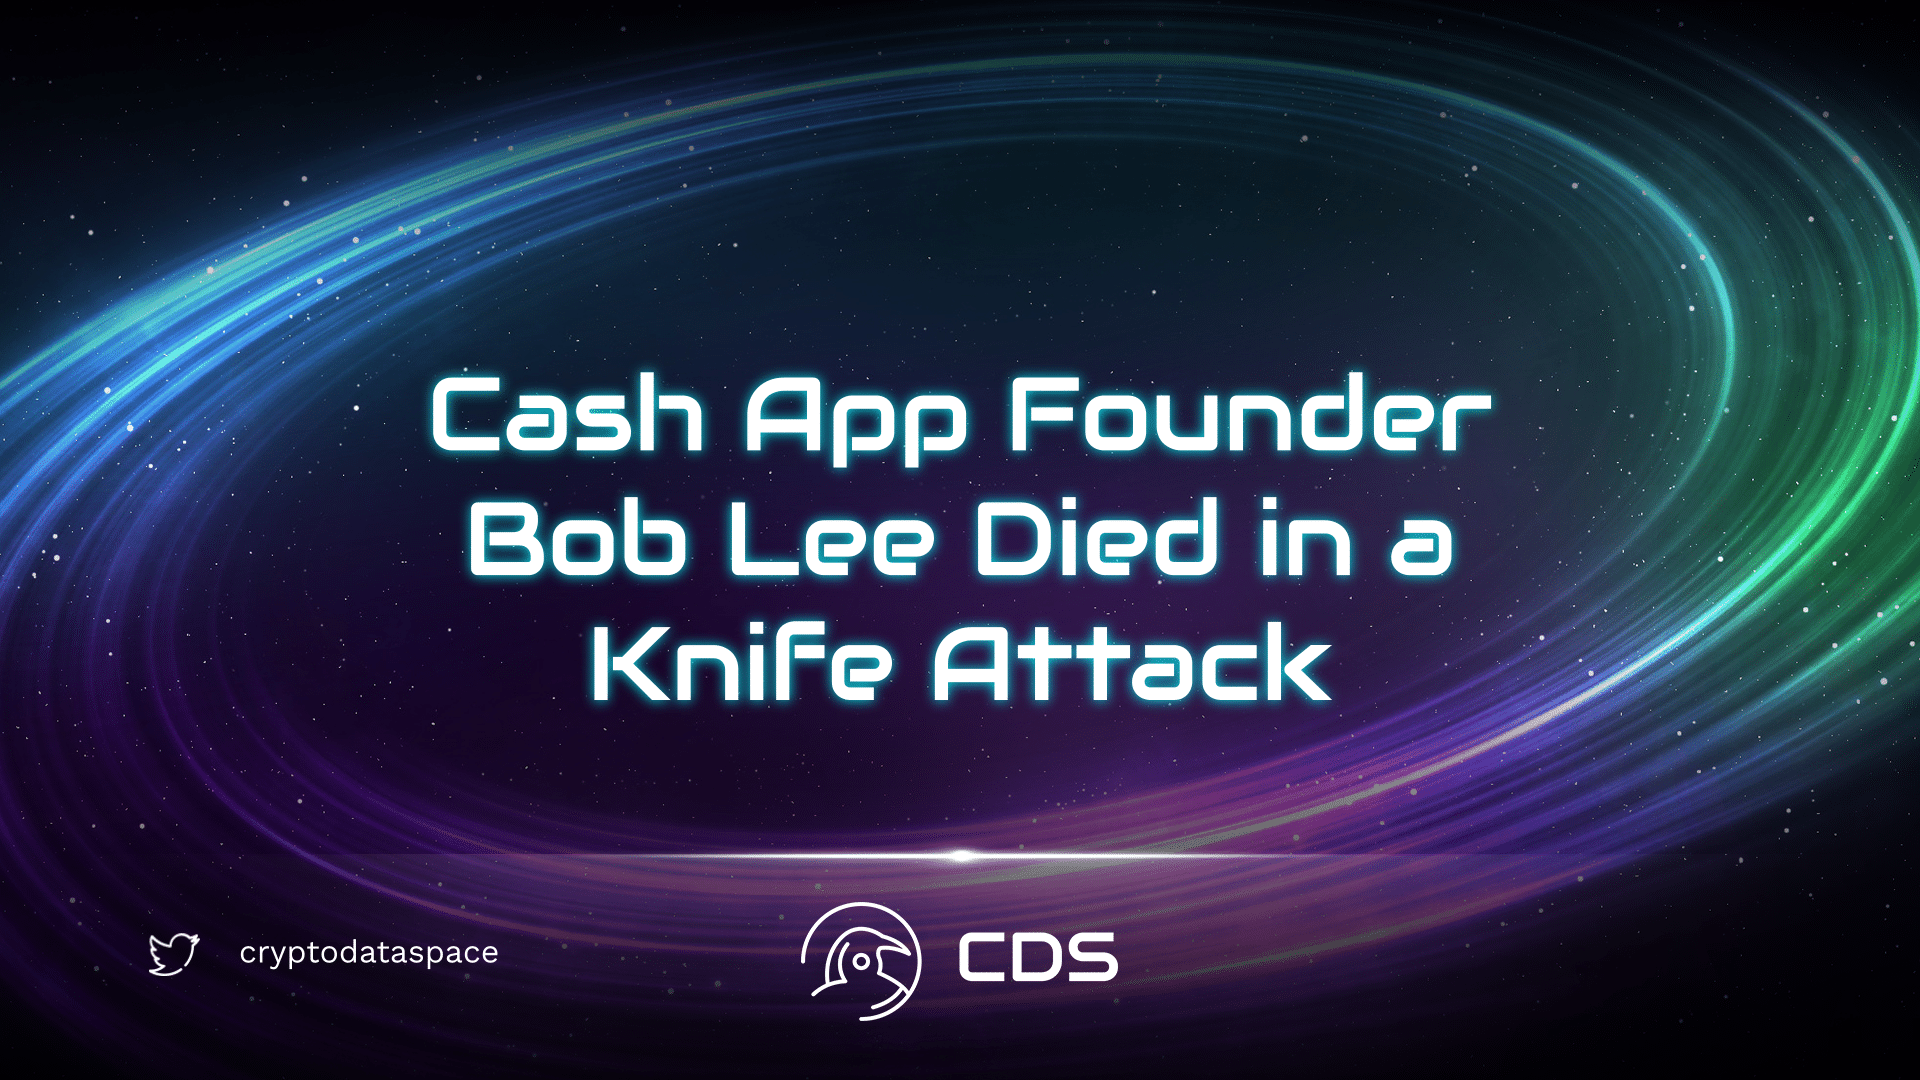 Cash App Founder Bob Lee Died in a Knife Attack